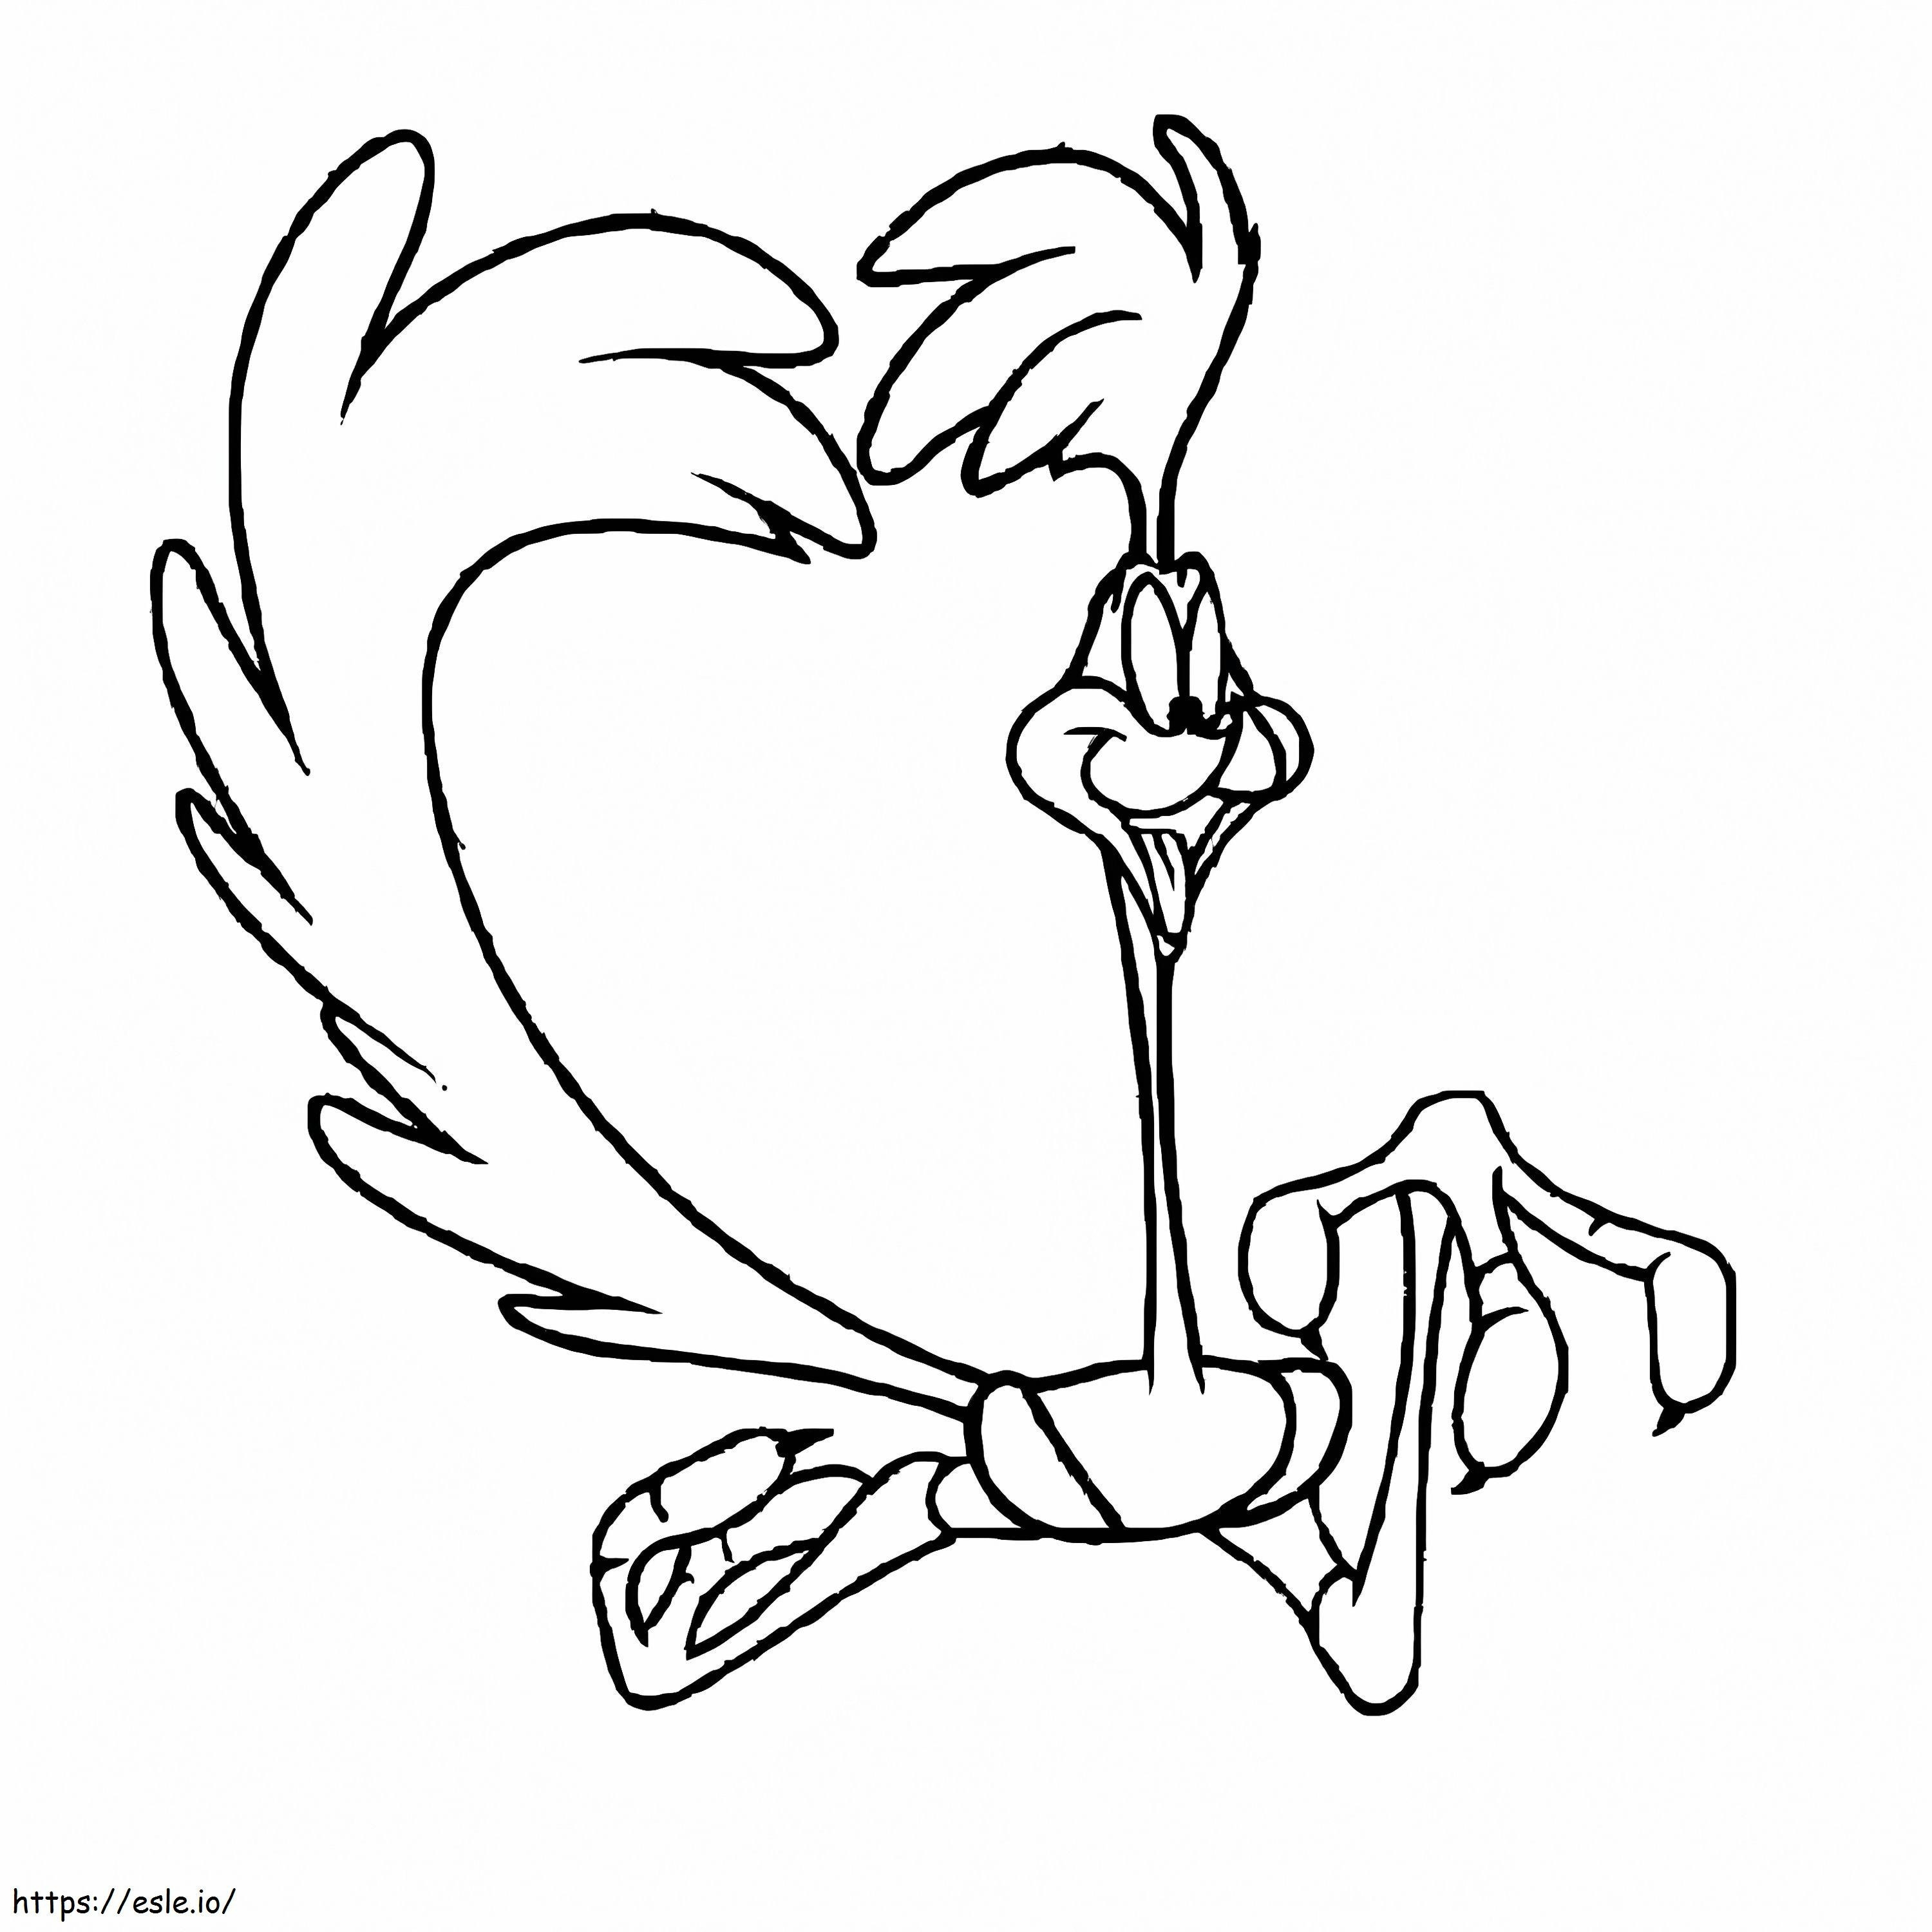 Simple Road Runner coloring page